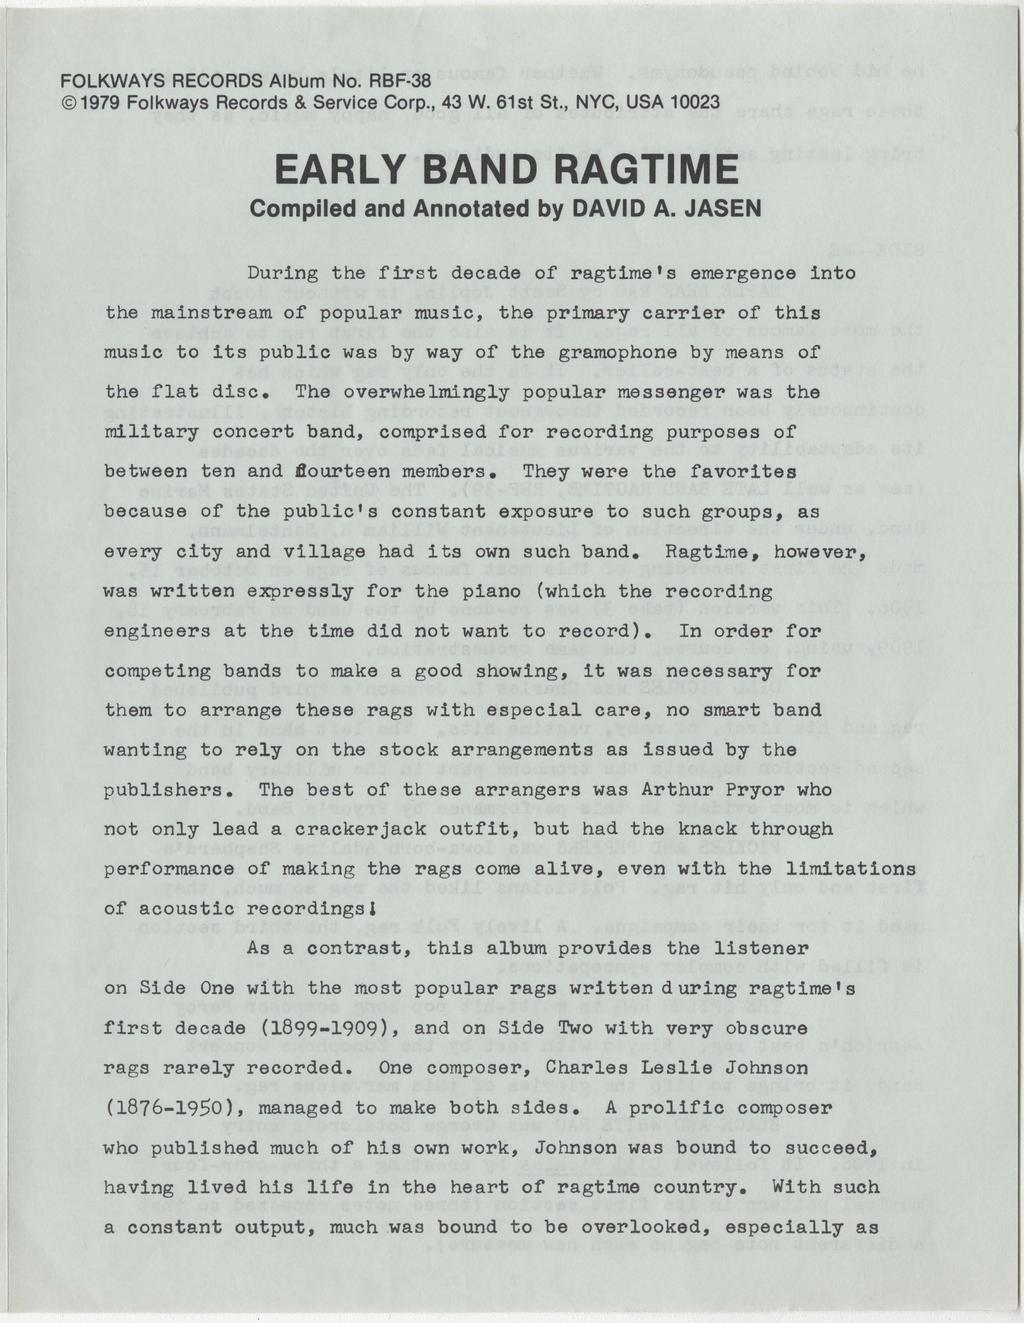 FOLKWAYS RECORDS Album No. RBF 38 1979 Folkways Records & Service Corp., 43 W. 61st St., NYC, USA 10023 EARLY BAND RAGTIME Compiled and Annotated by DAVI D A.